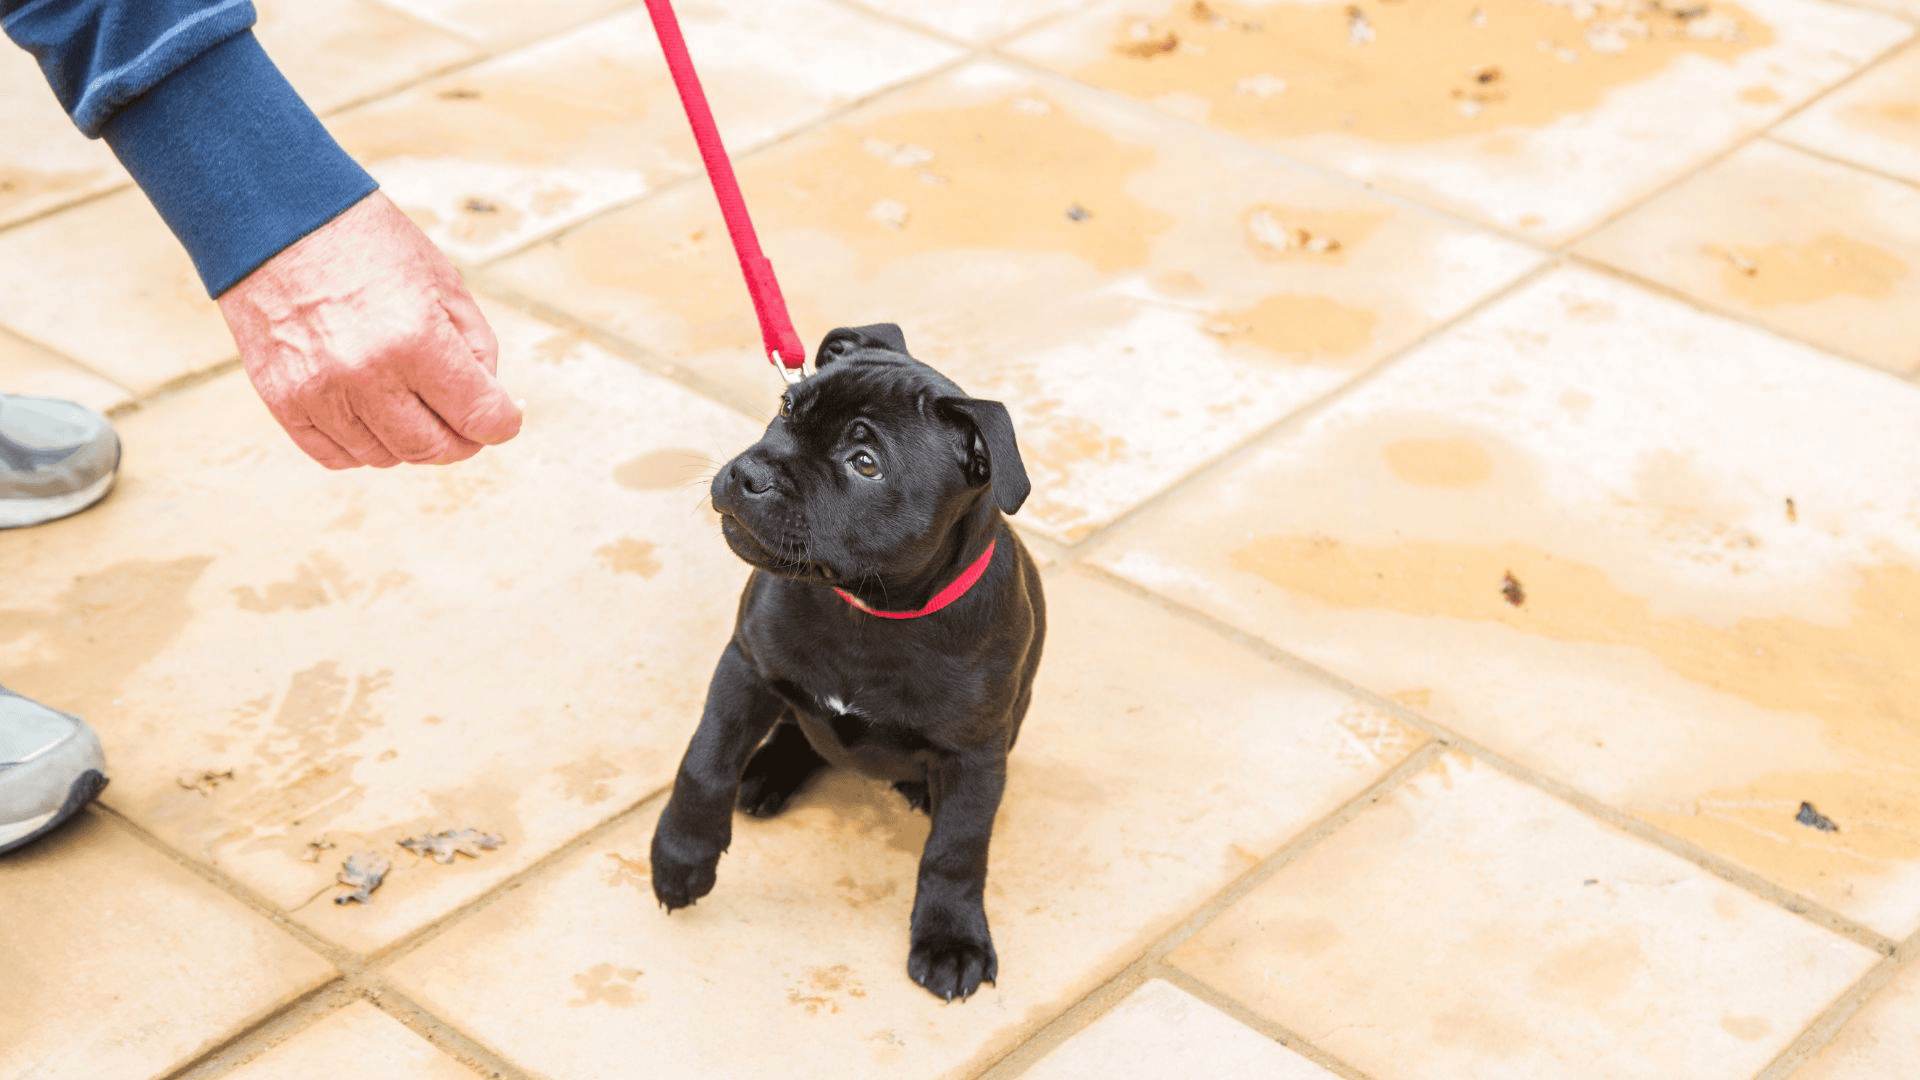 Puppy leash training is one of dog owners biggest responsibilities. Leash train your puppy with a dog leash early.